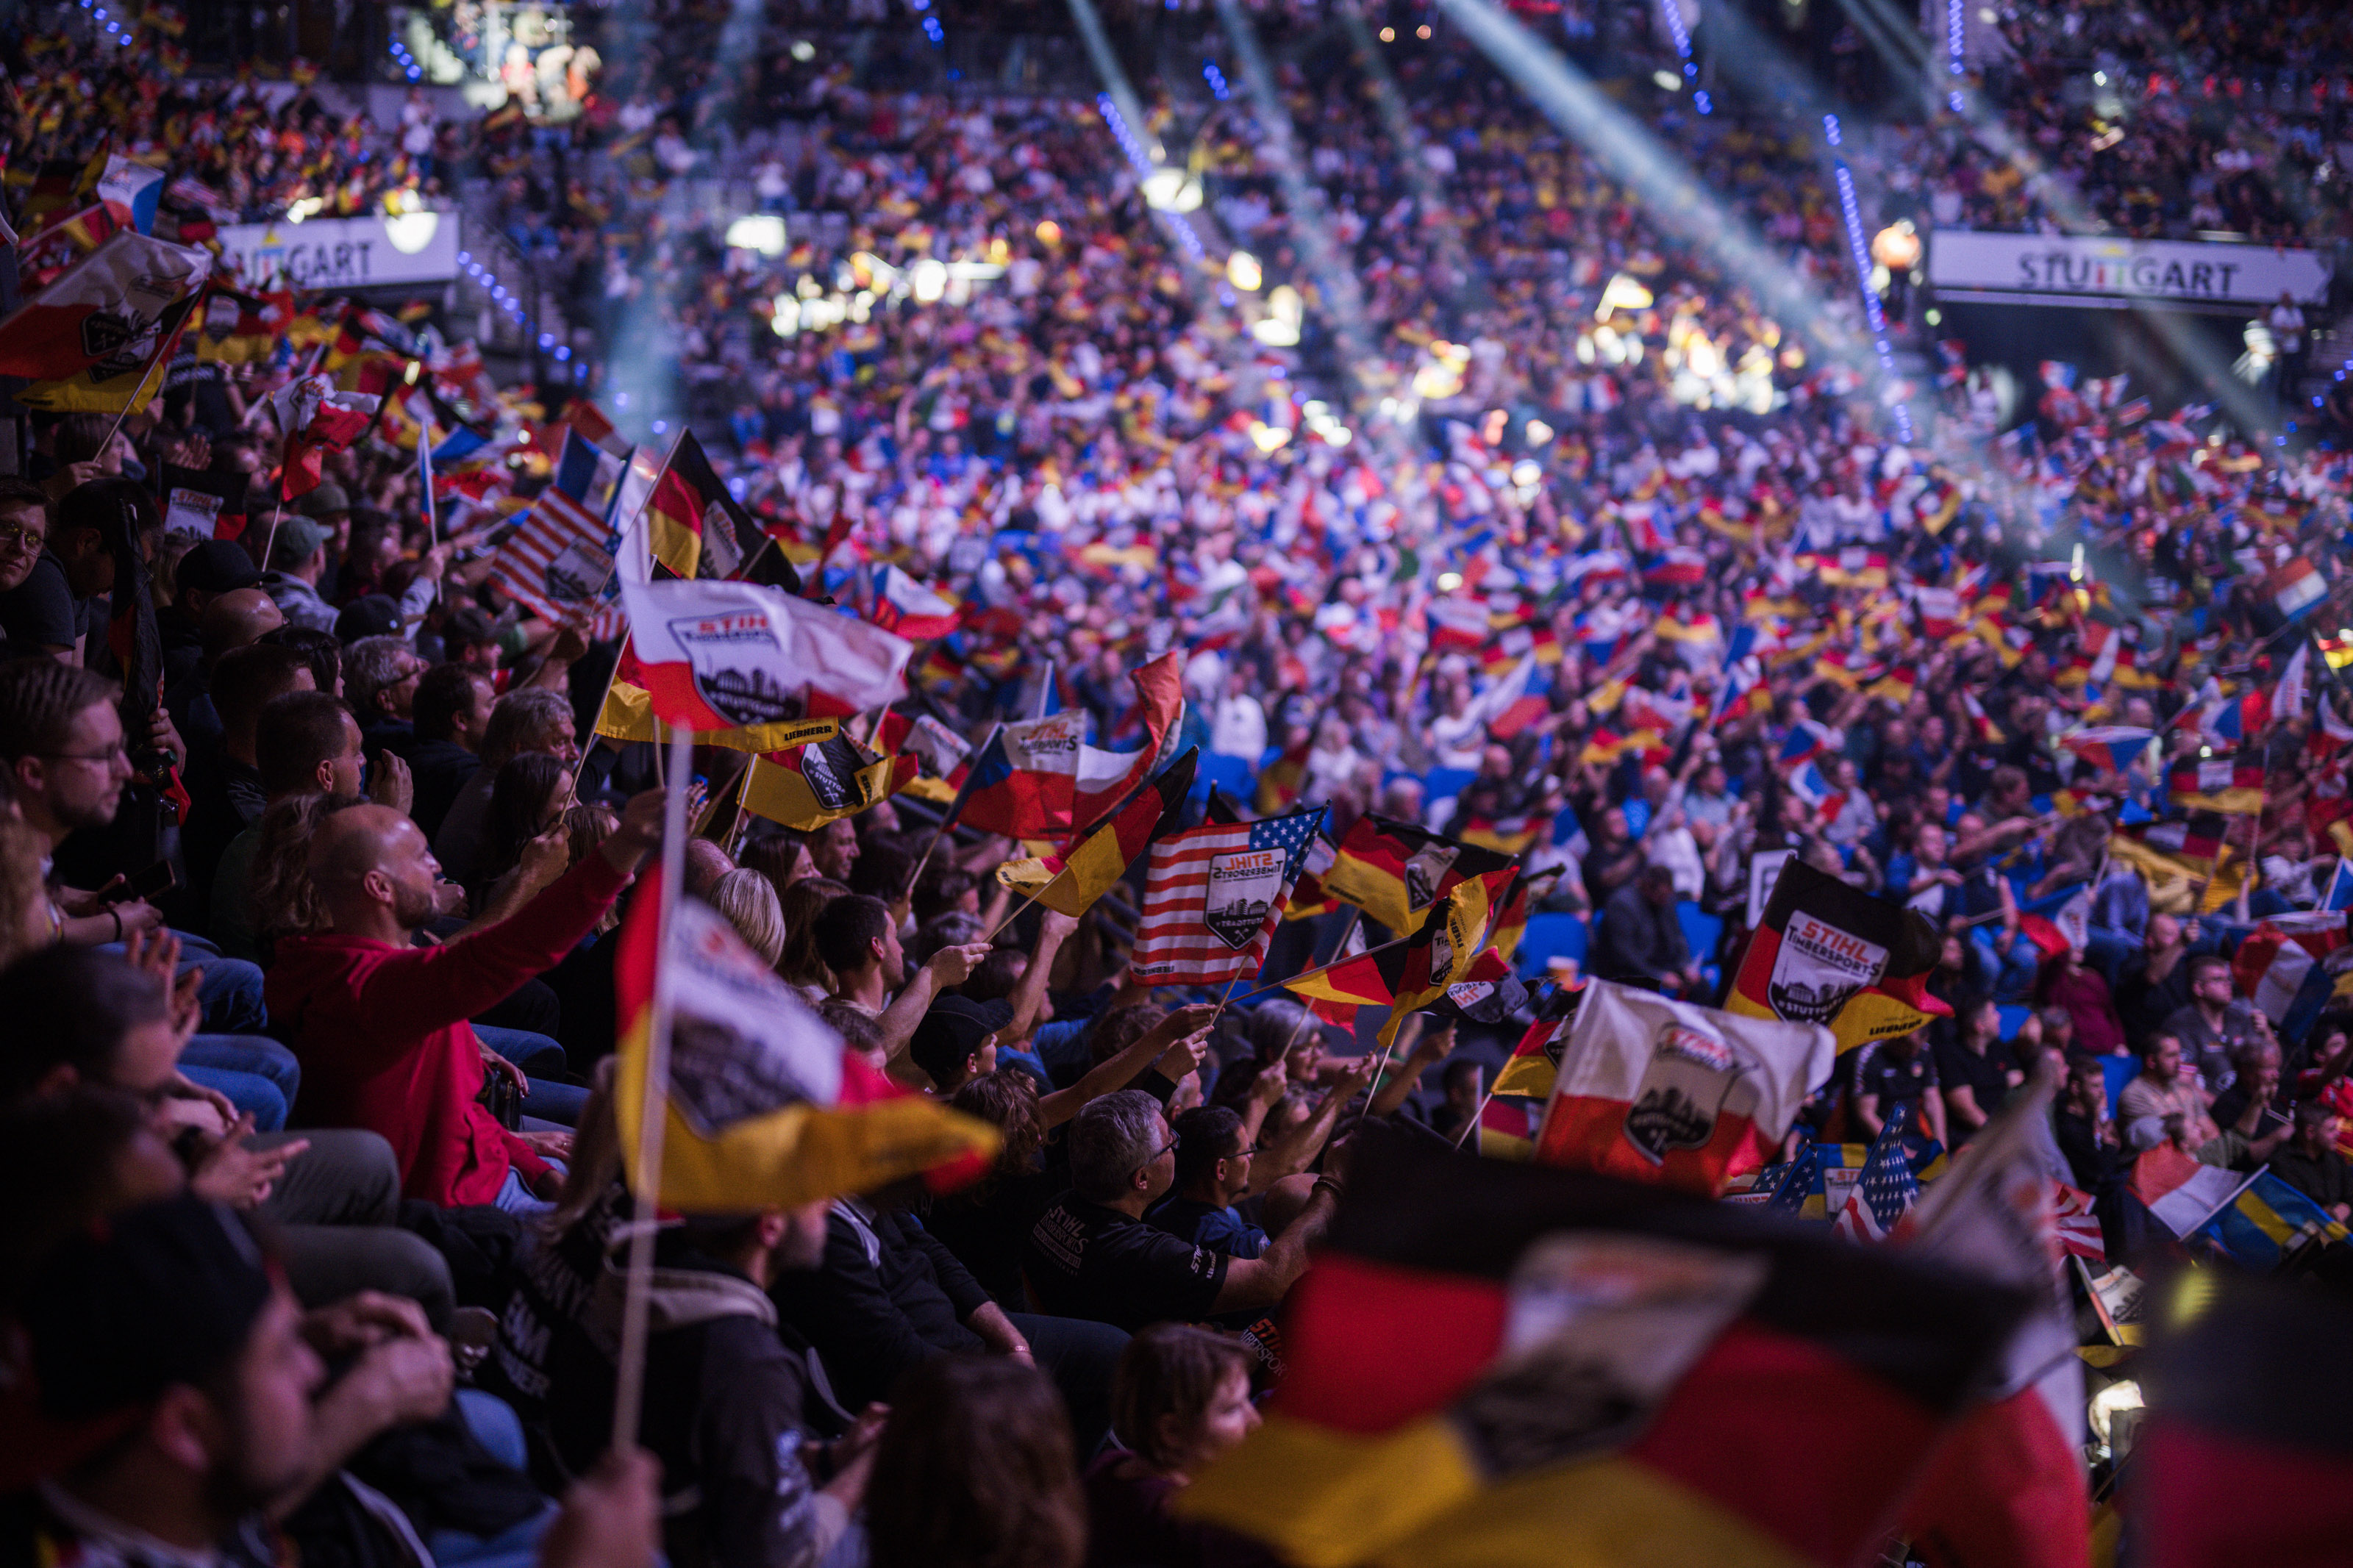 Sold-out arena at the 2023 World Championship in Stuttgart. STIHL TIMBERSPORTS® is looking forward to the competition season with the fans again this year.